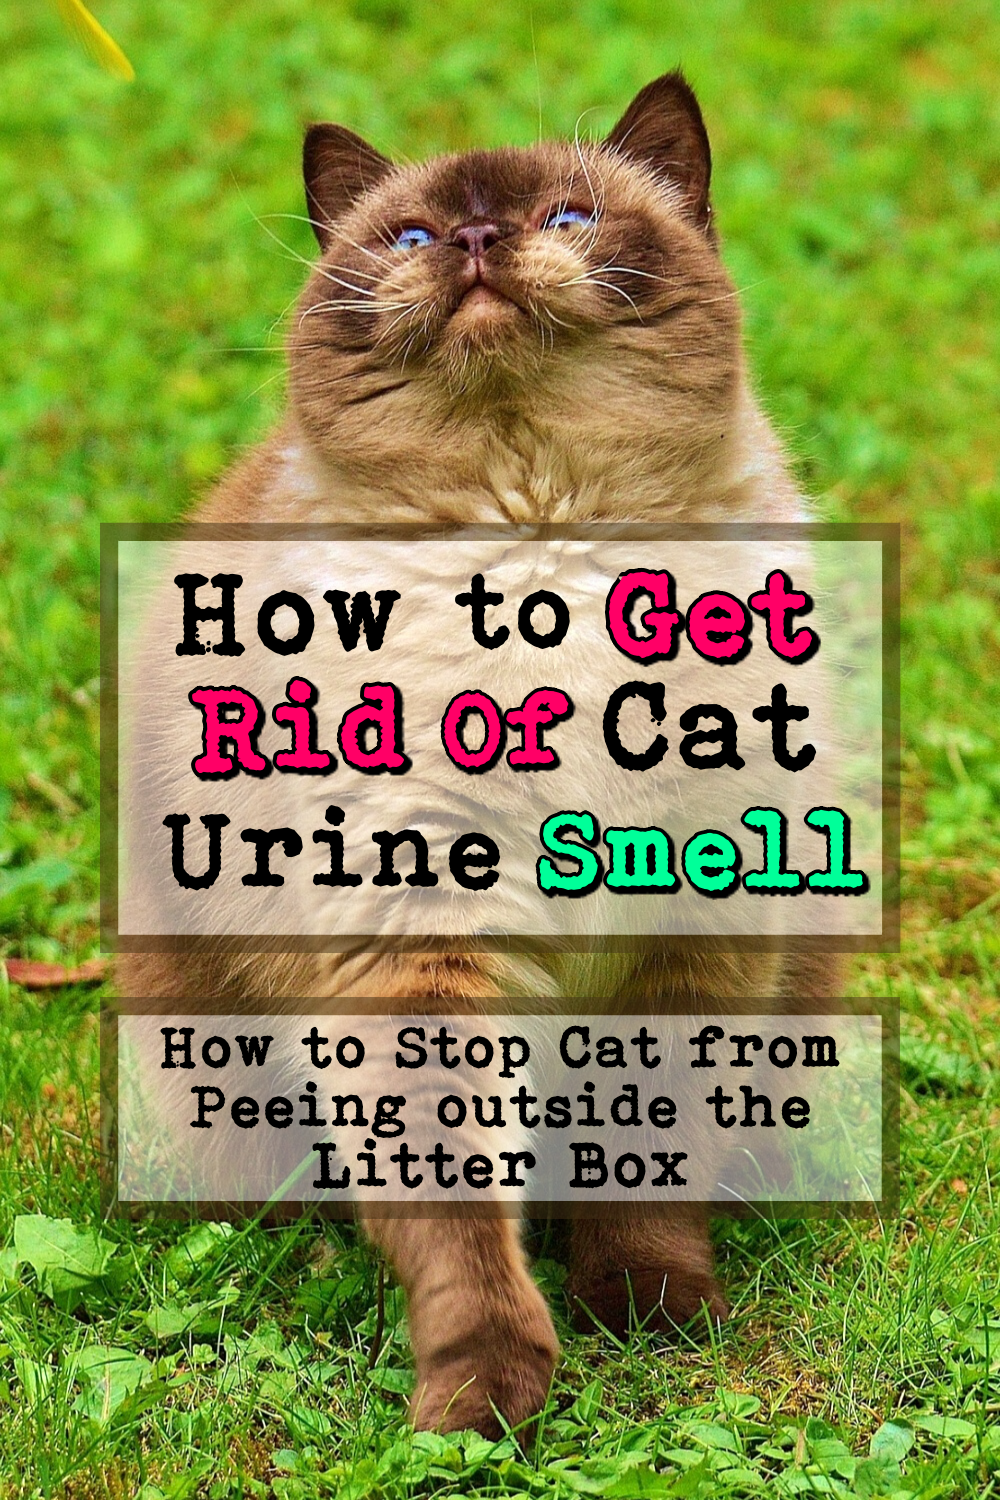 How To Get Rid Of Cat Urine Smell!